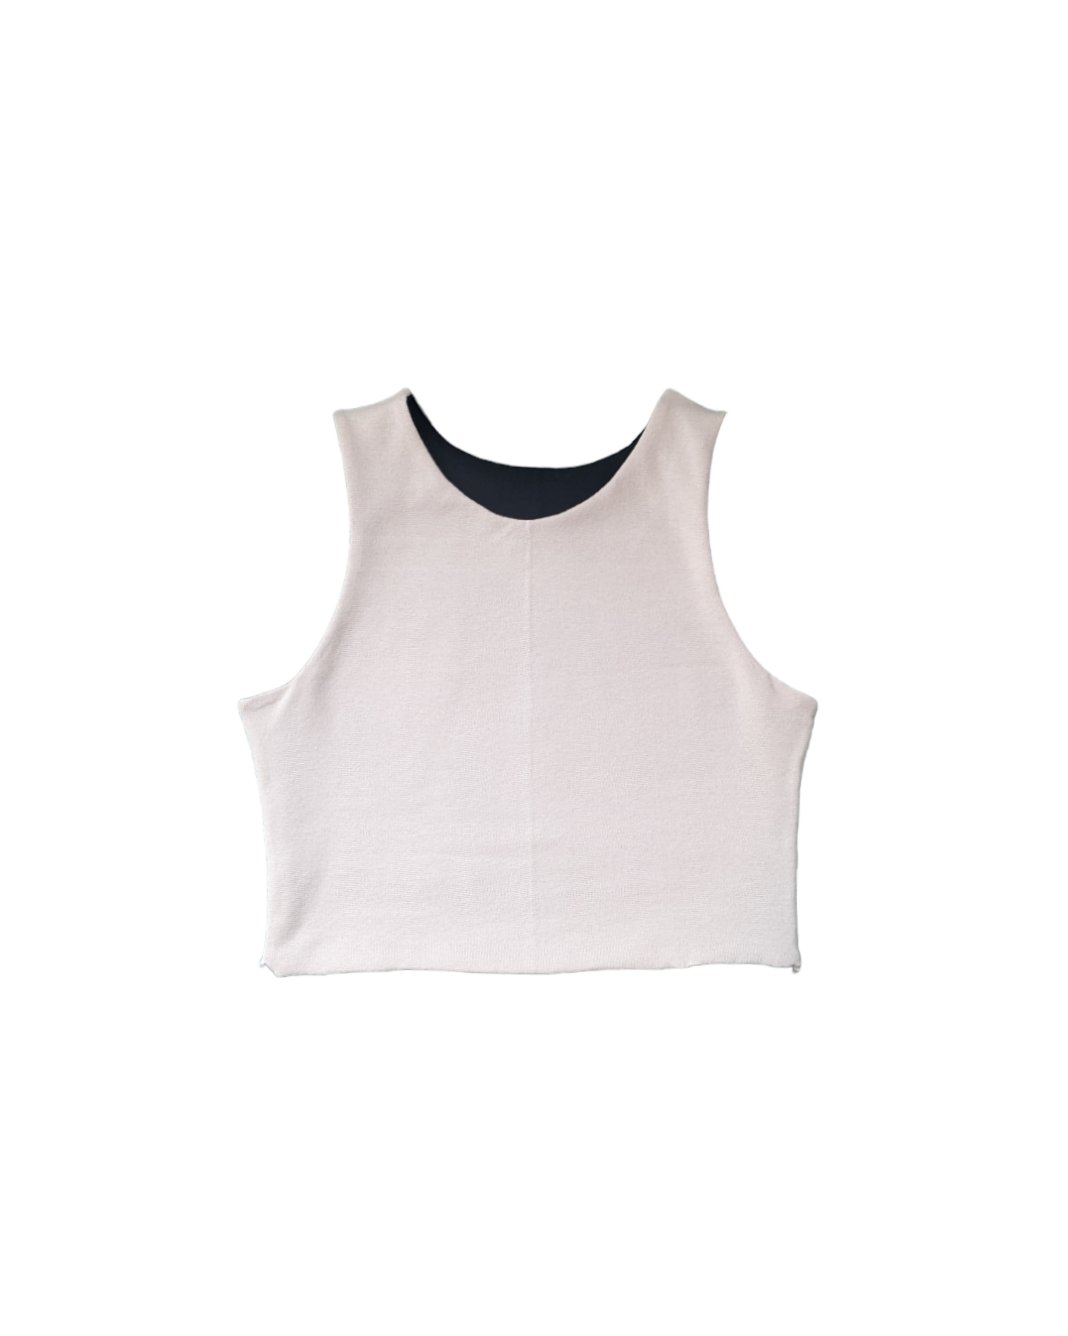 Image of CATCALL: THE REVERSIBLE CROP TOP in WHITE